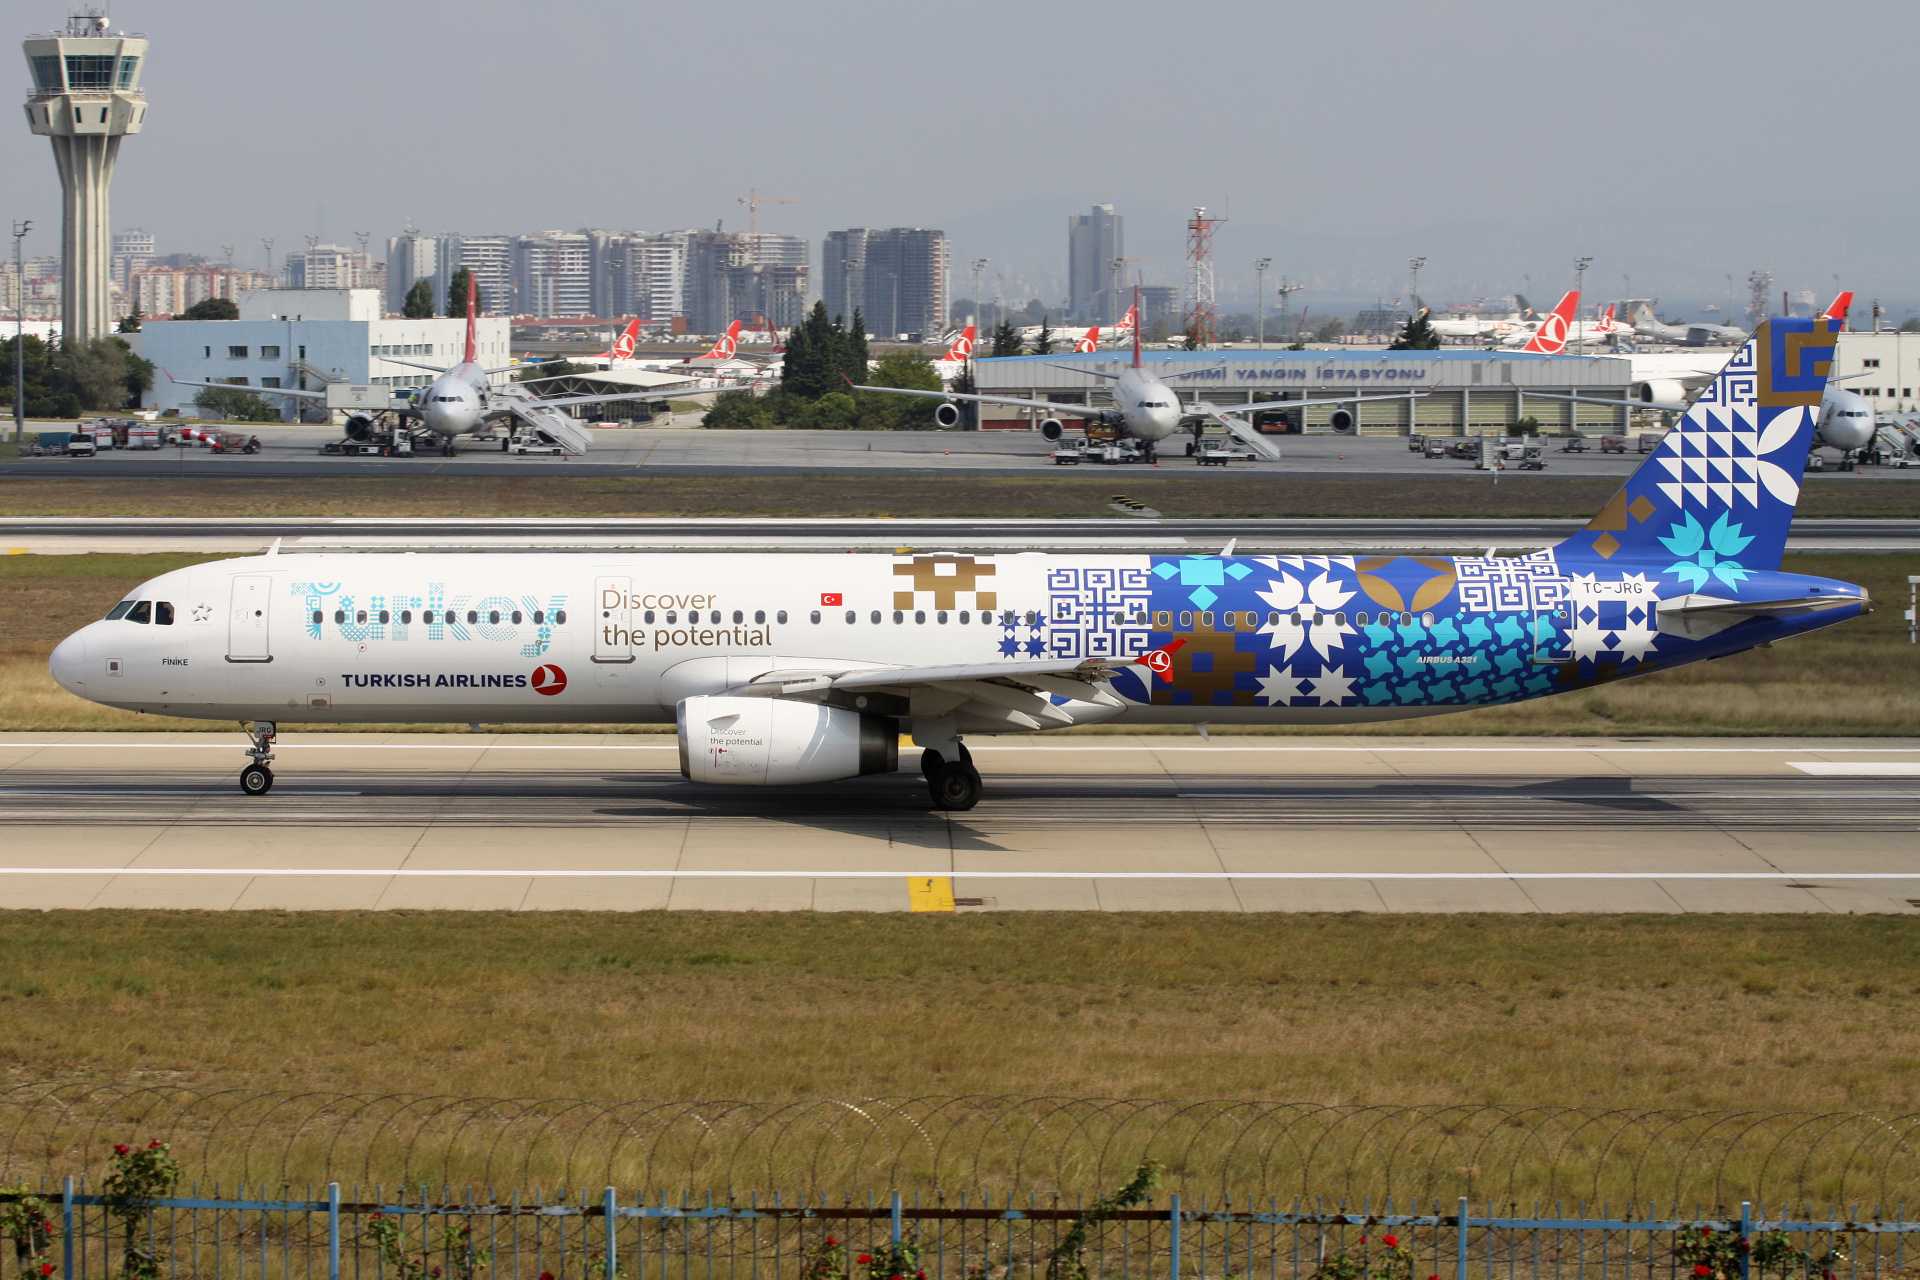 TC-JRG (Turkey - Discover the potential livery) (Aircraft » Istanbul Atatürk Airport » Airbus A321-200 » THY Turkish Airlines)